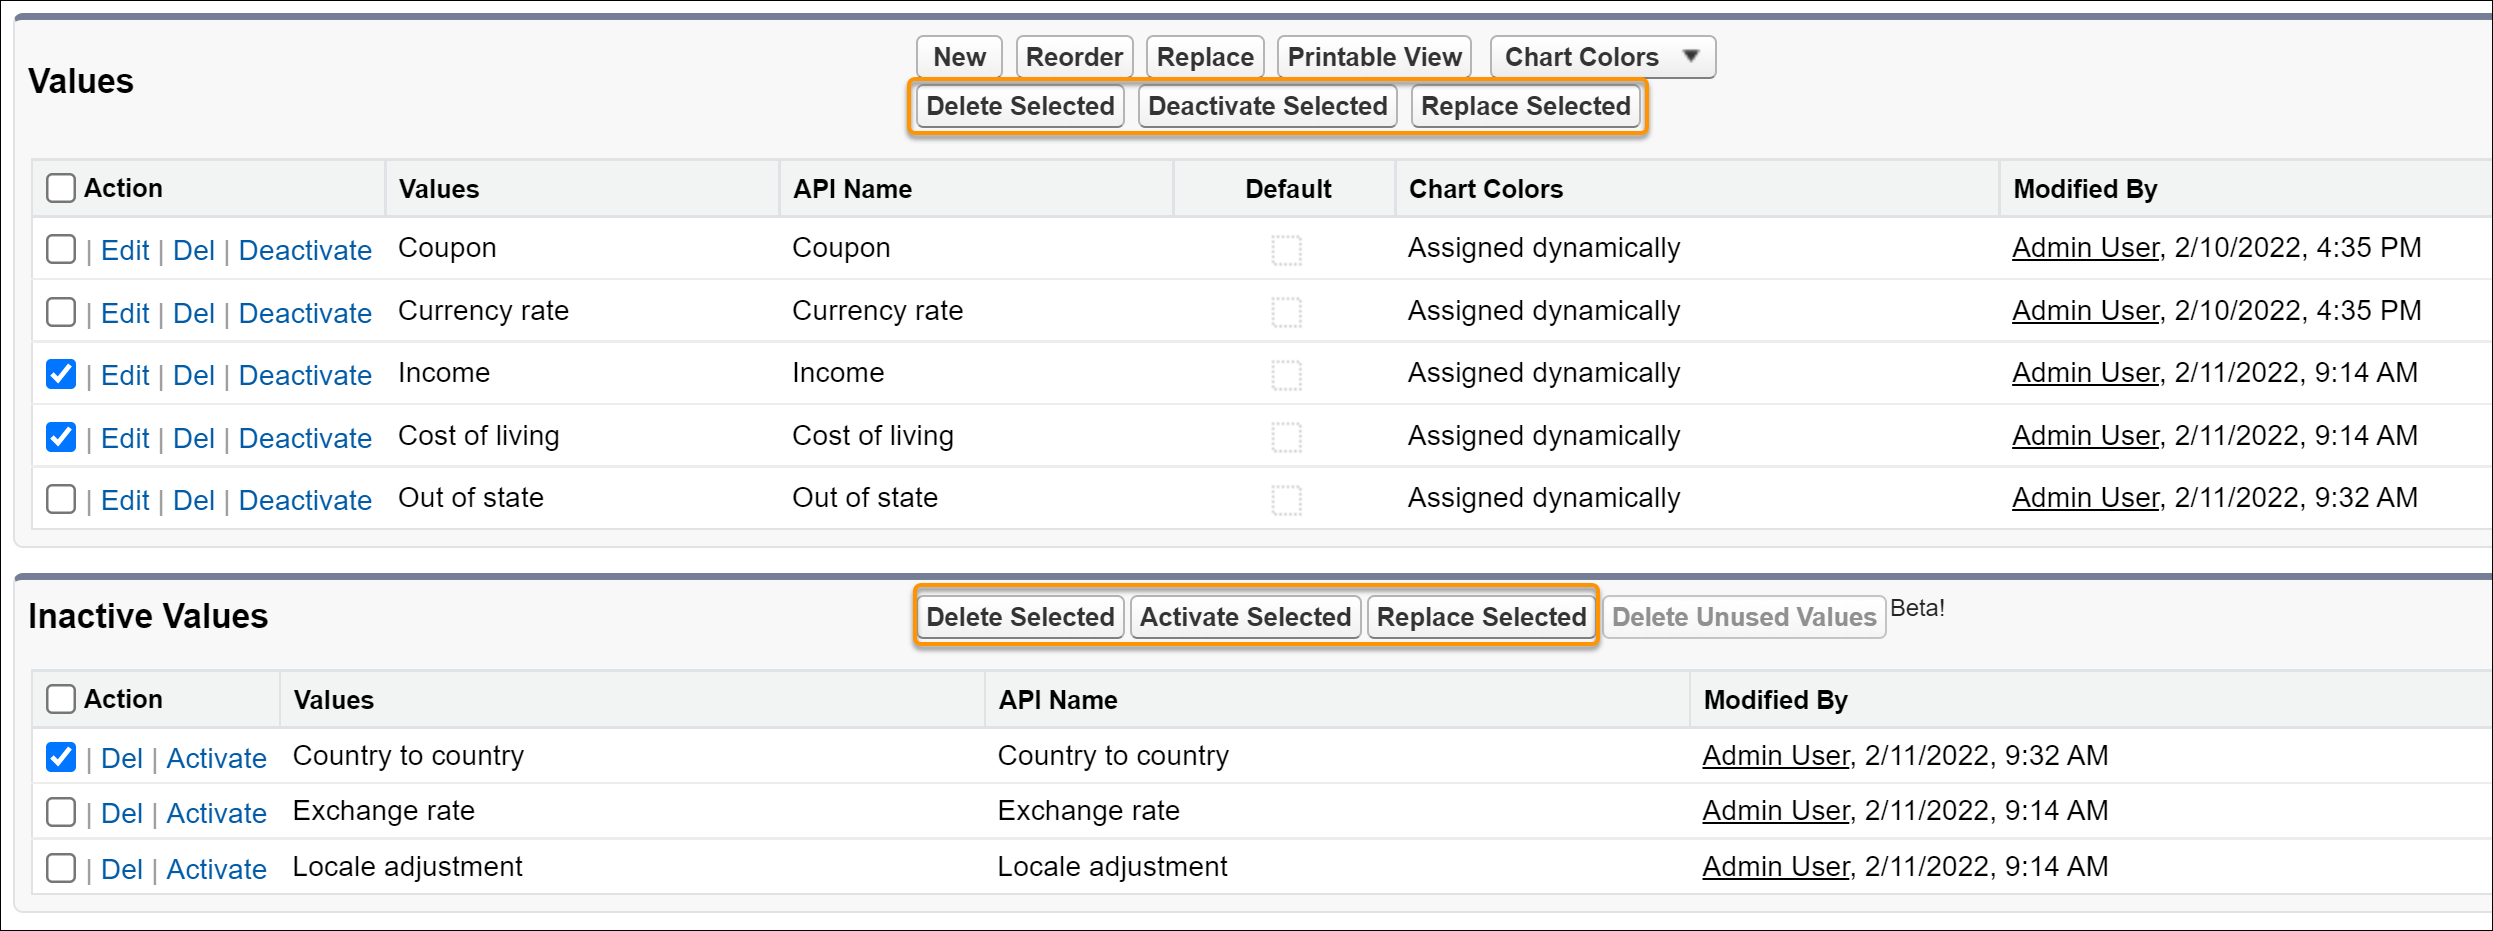 Salesforce Summer '22 Release - The advanced picklist values management buttons in the Values and Inactive Values panes